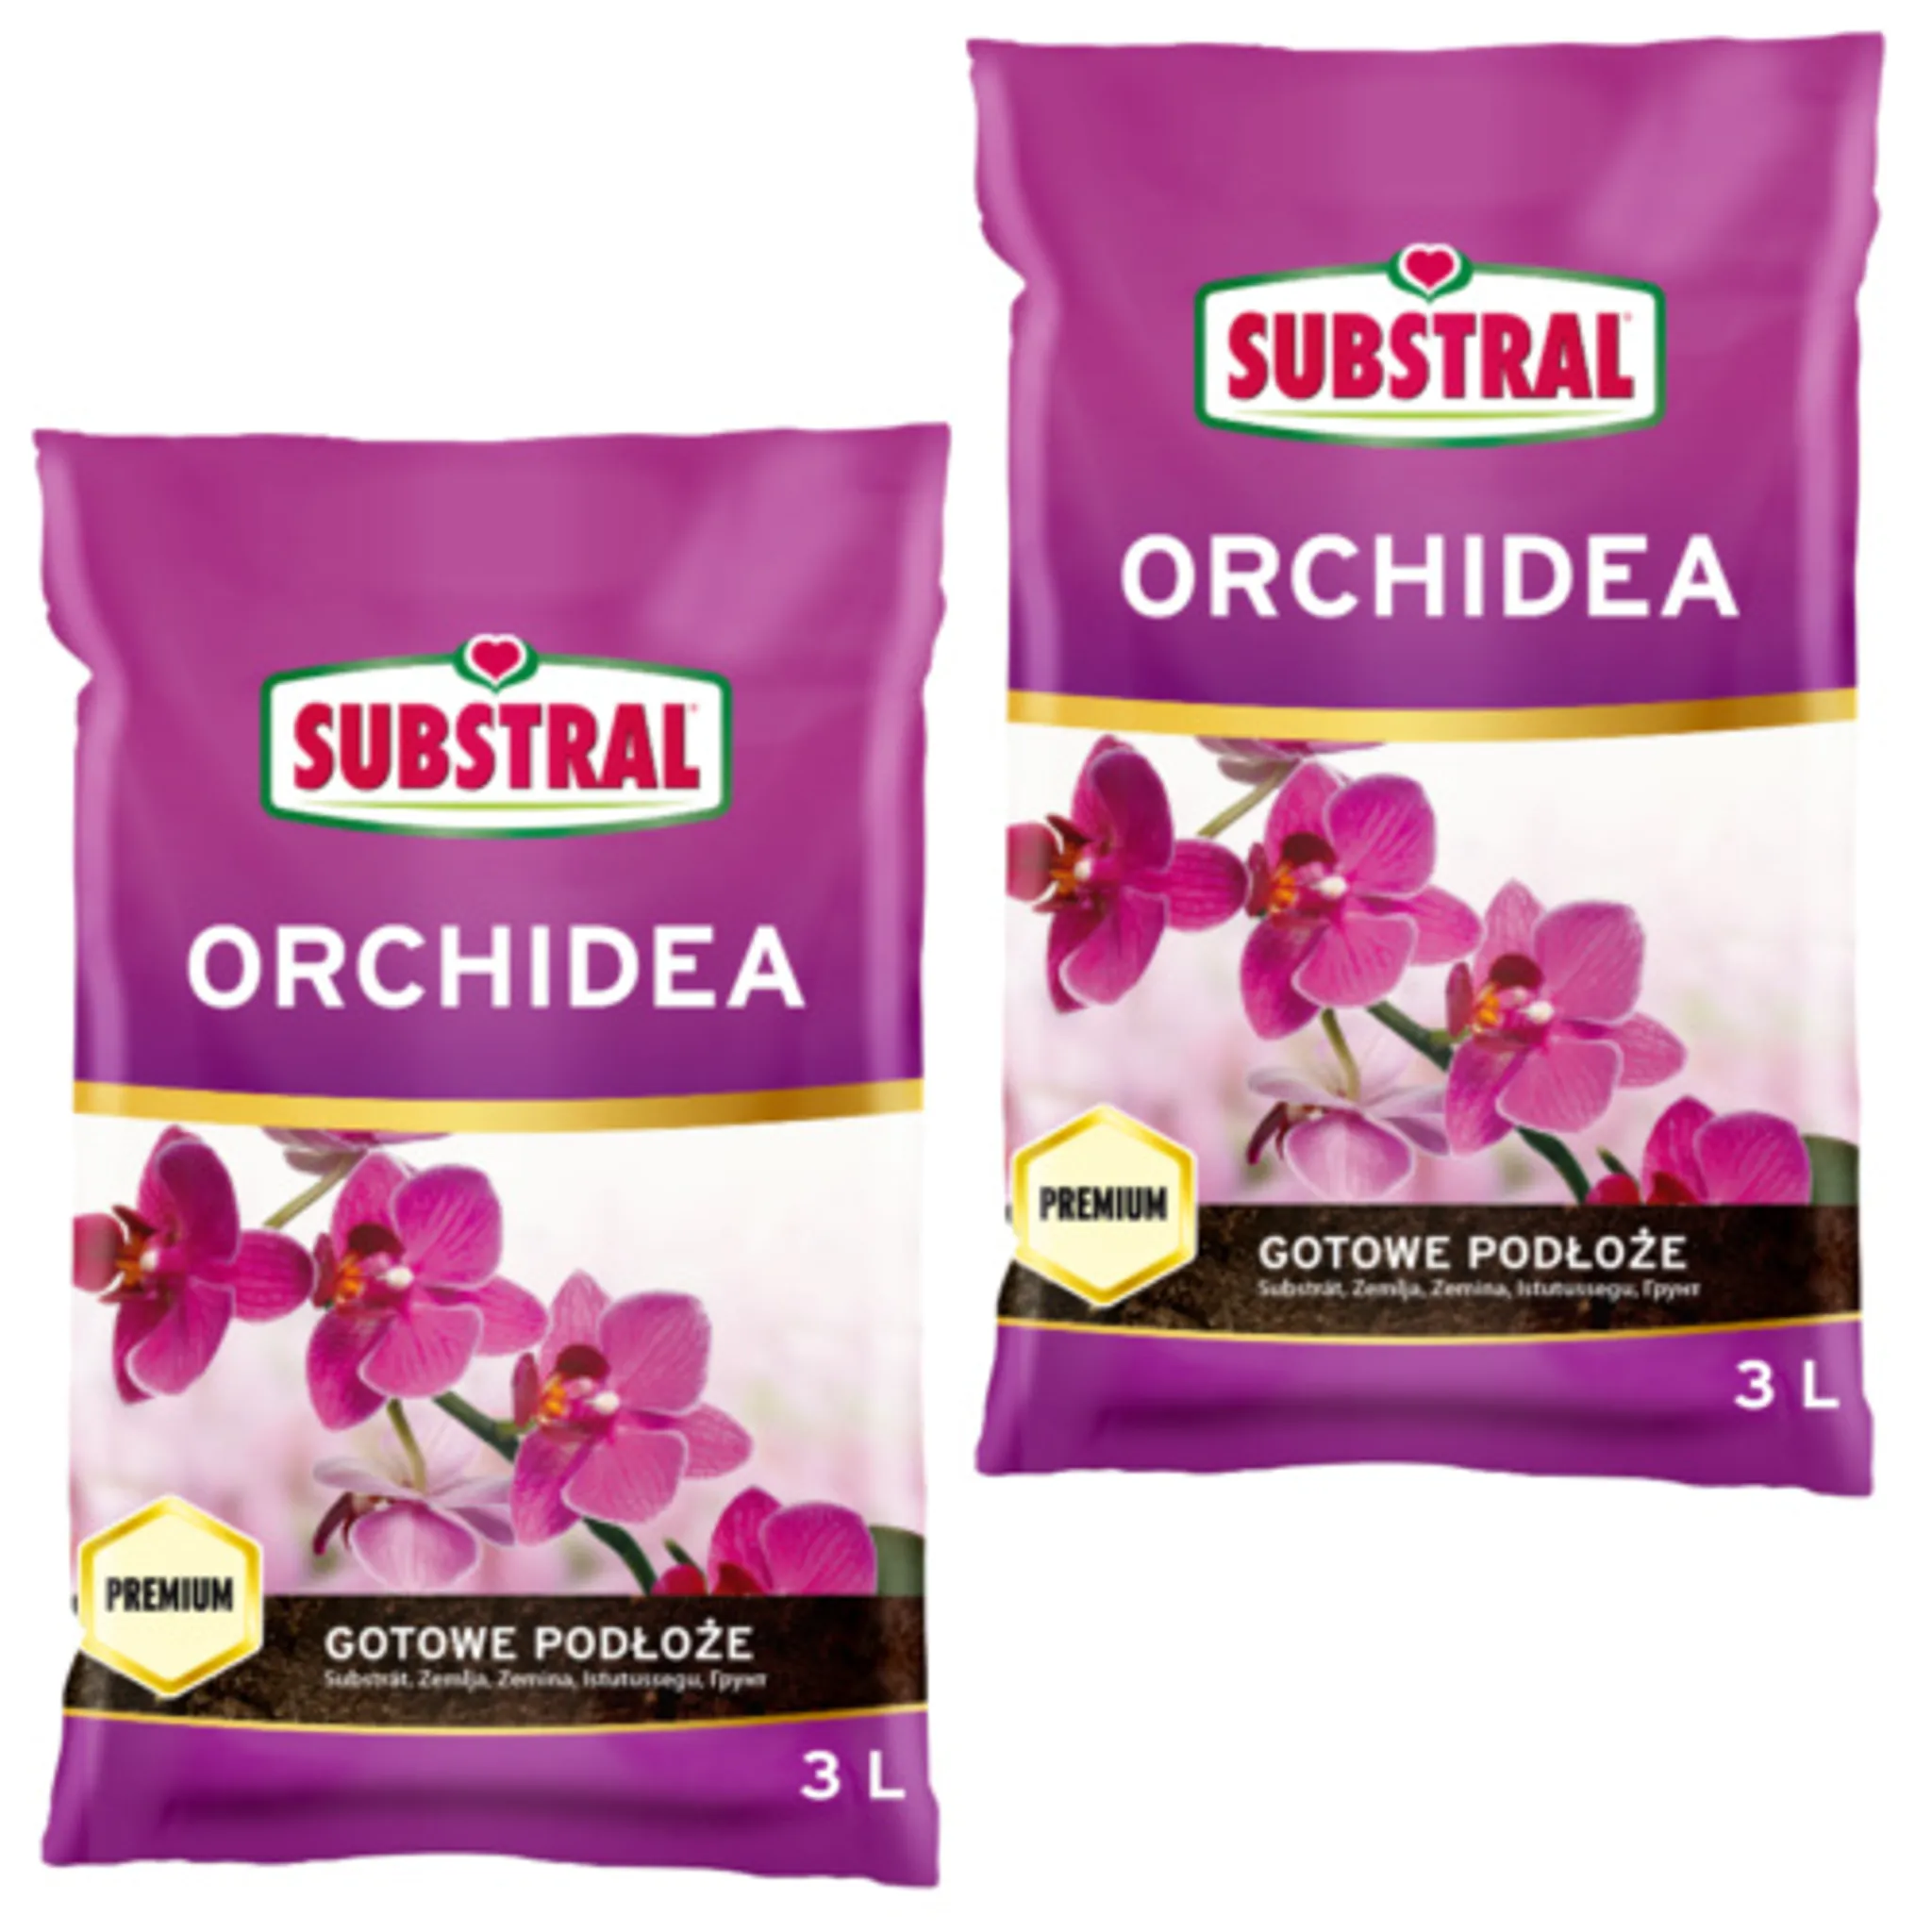 SUBSTRAL TERREAU ORCHIDEE 6 L